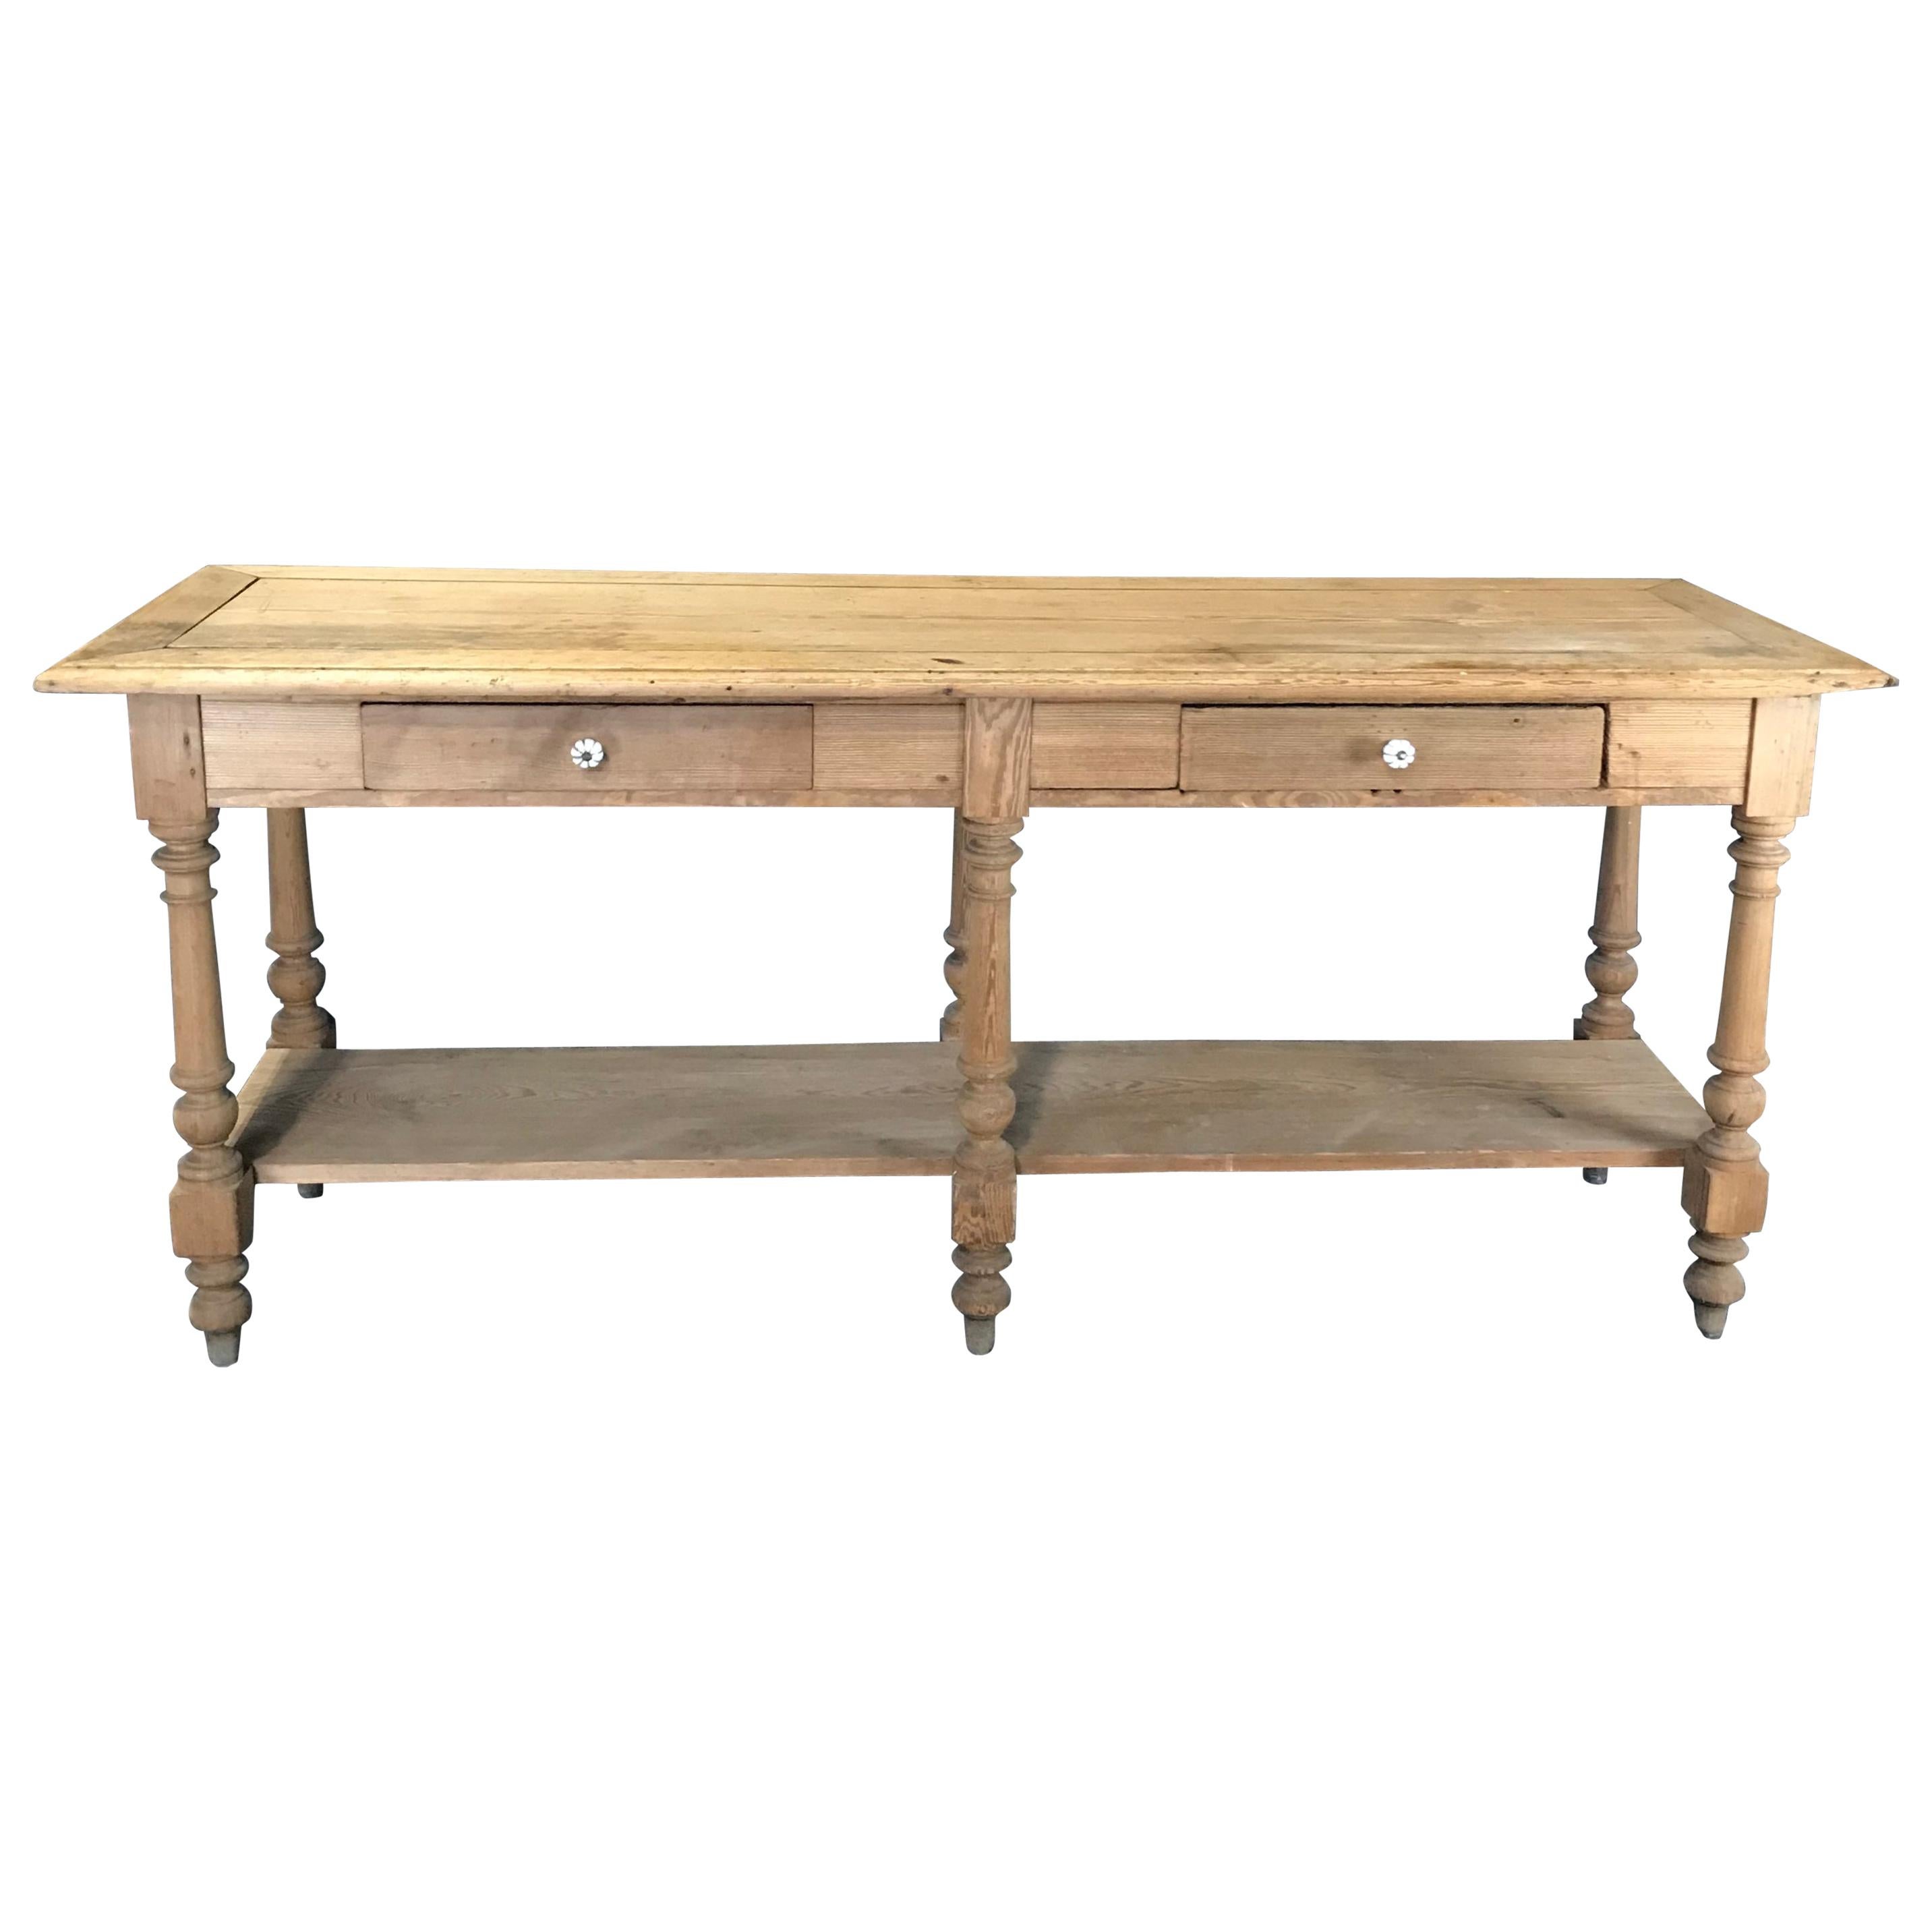 Rustic Antique French Scrubbed Pine Sideboard Sofa Table or Credenza